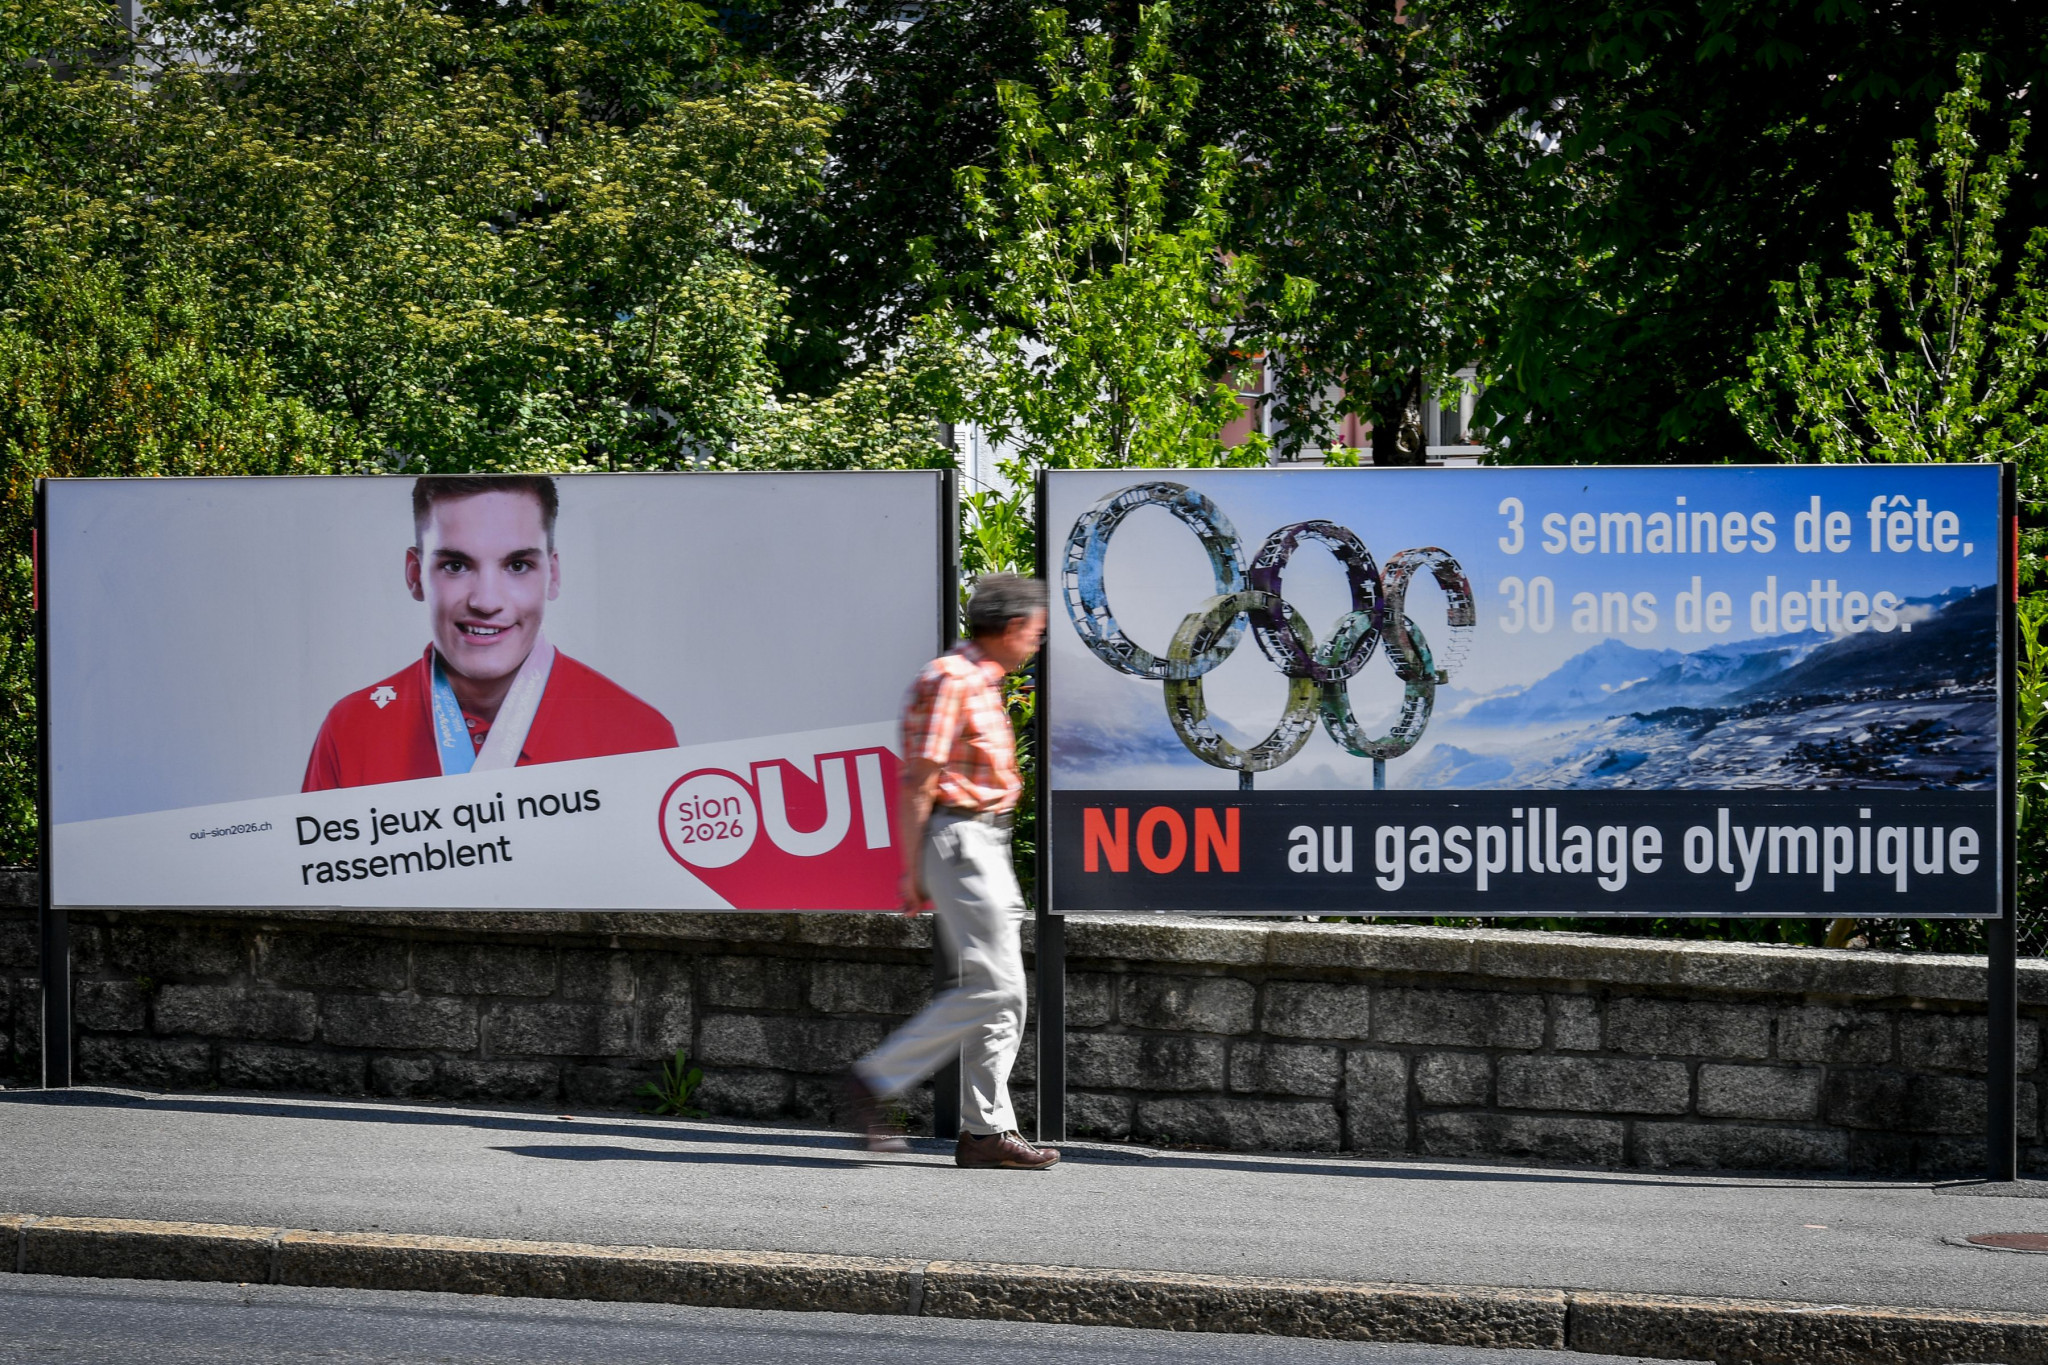 Posters supporting and opposing the Sion 2026 bid placed side by side ©Getty Images